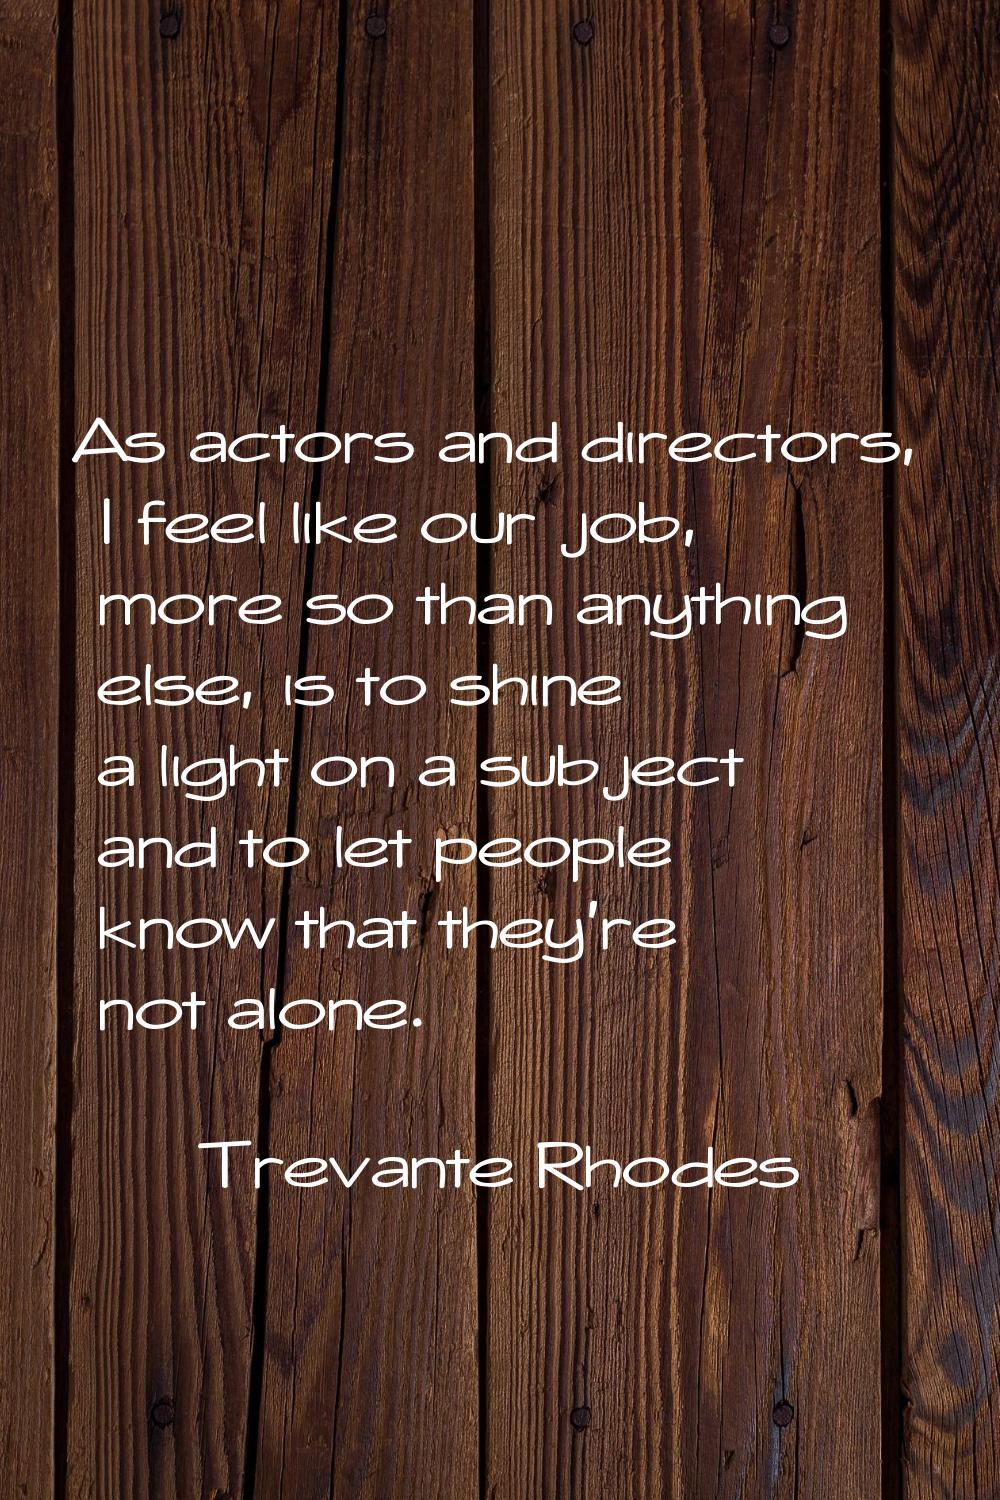 As actors and directors, I feel like our job, more so than anything else, is to shine a light on a 